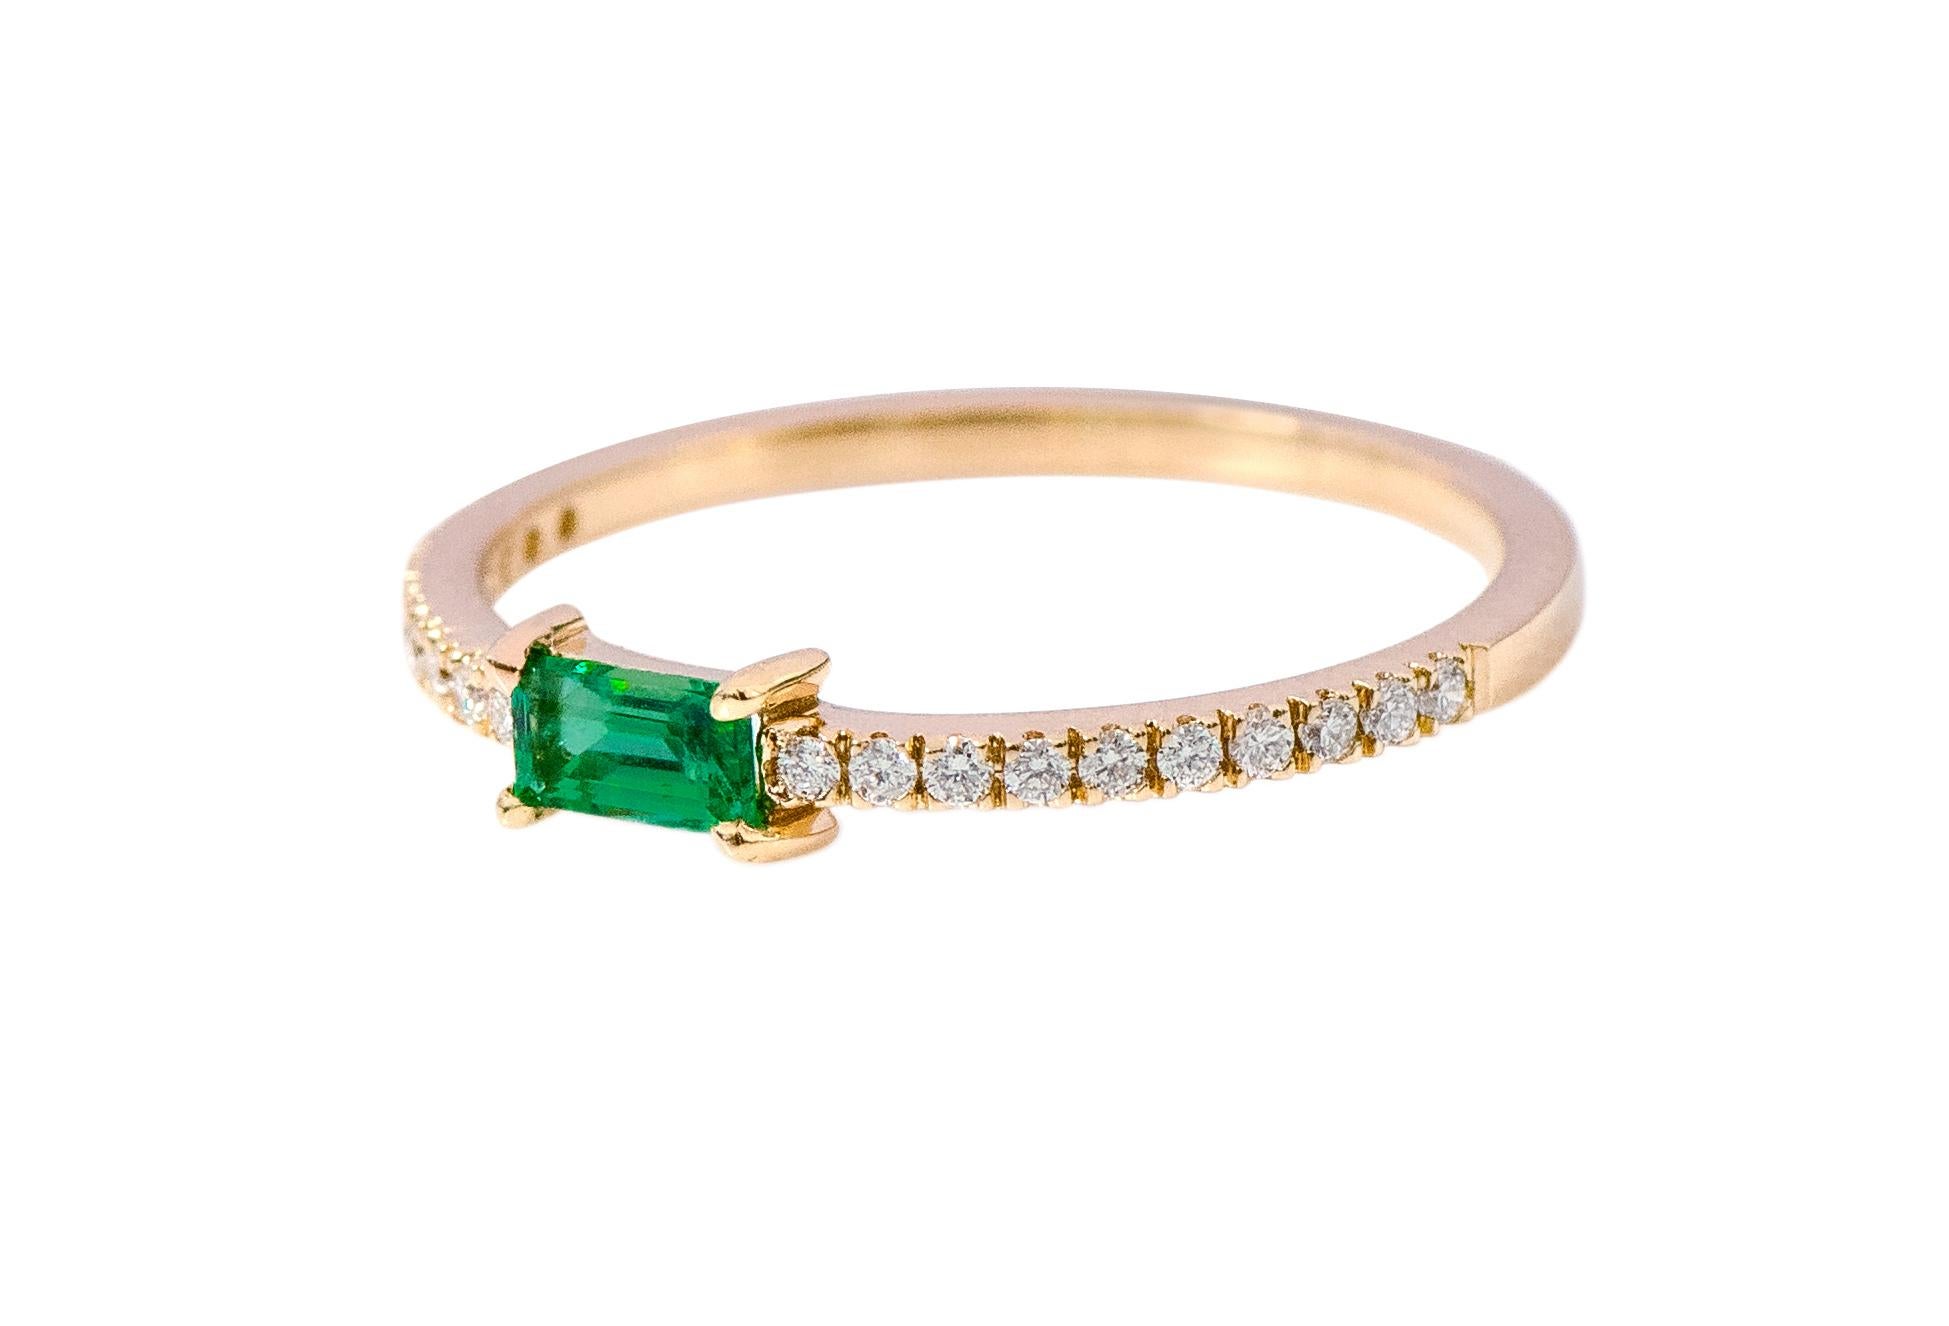 18 Karat Yellow Gold Emerald and Diamond Solitaire Eternity Band Ring

This exquisite vivid green emerald and diamond ring is scintillating. The solitaire baguette cut emerald in eagle prong box setting in rose gold is perfect. The thin band of half